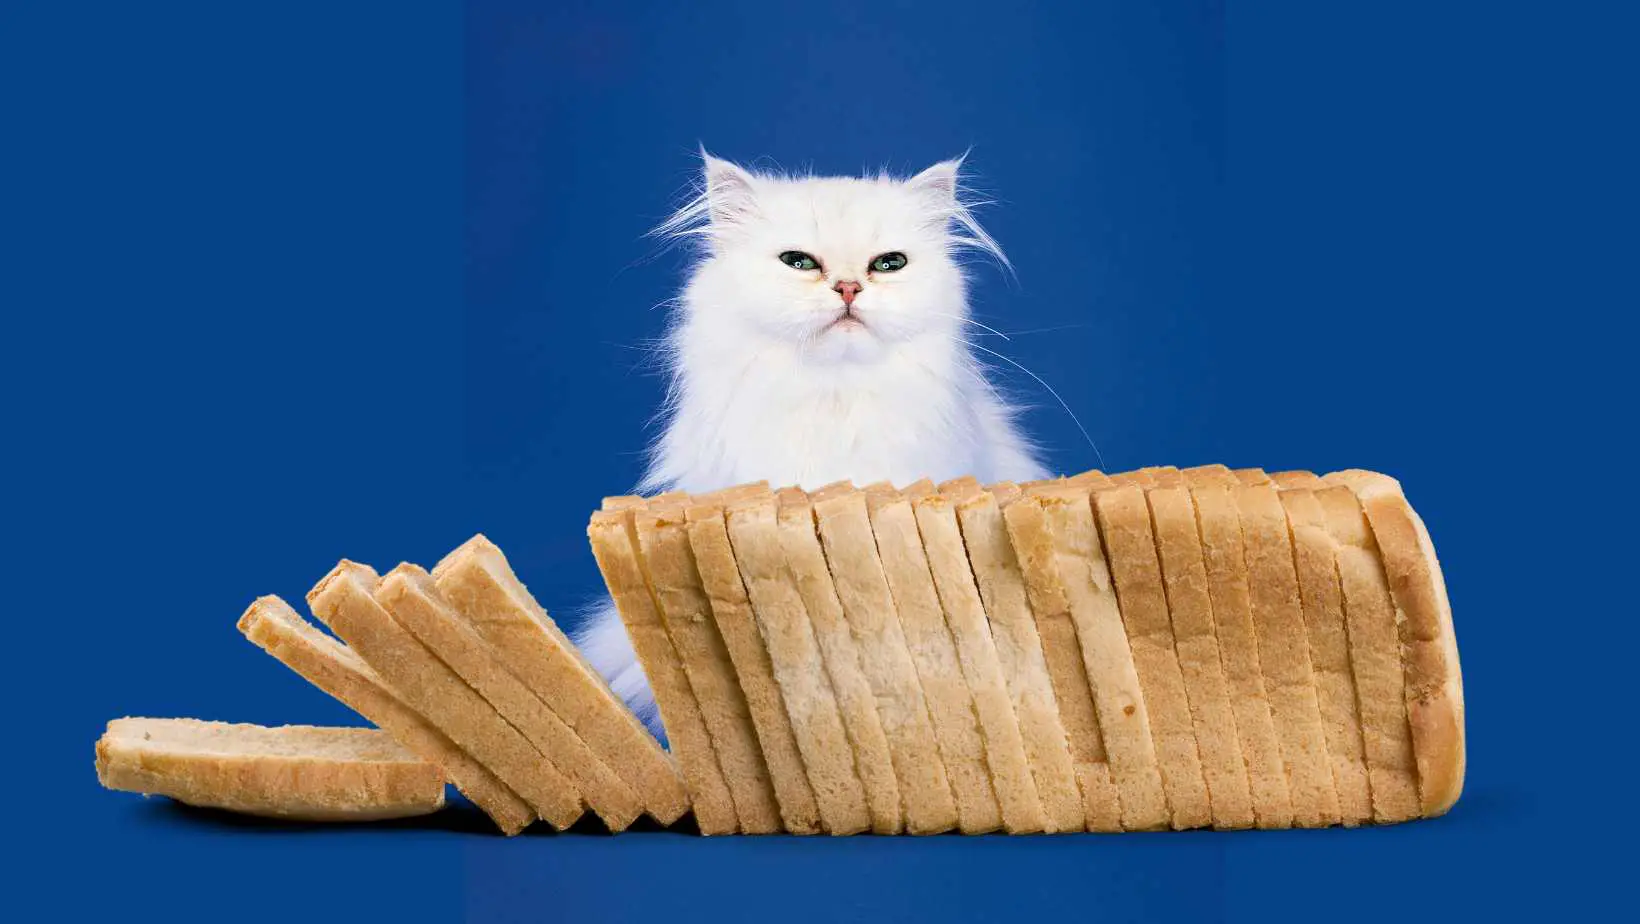 Can Cats Eat White Bread?